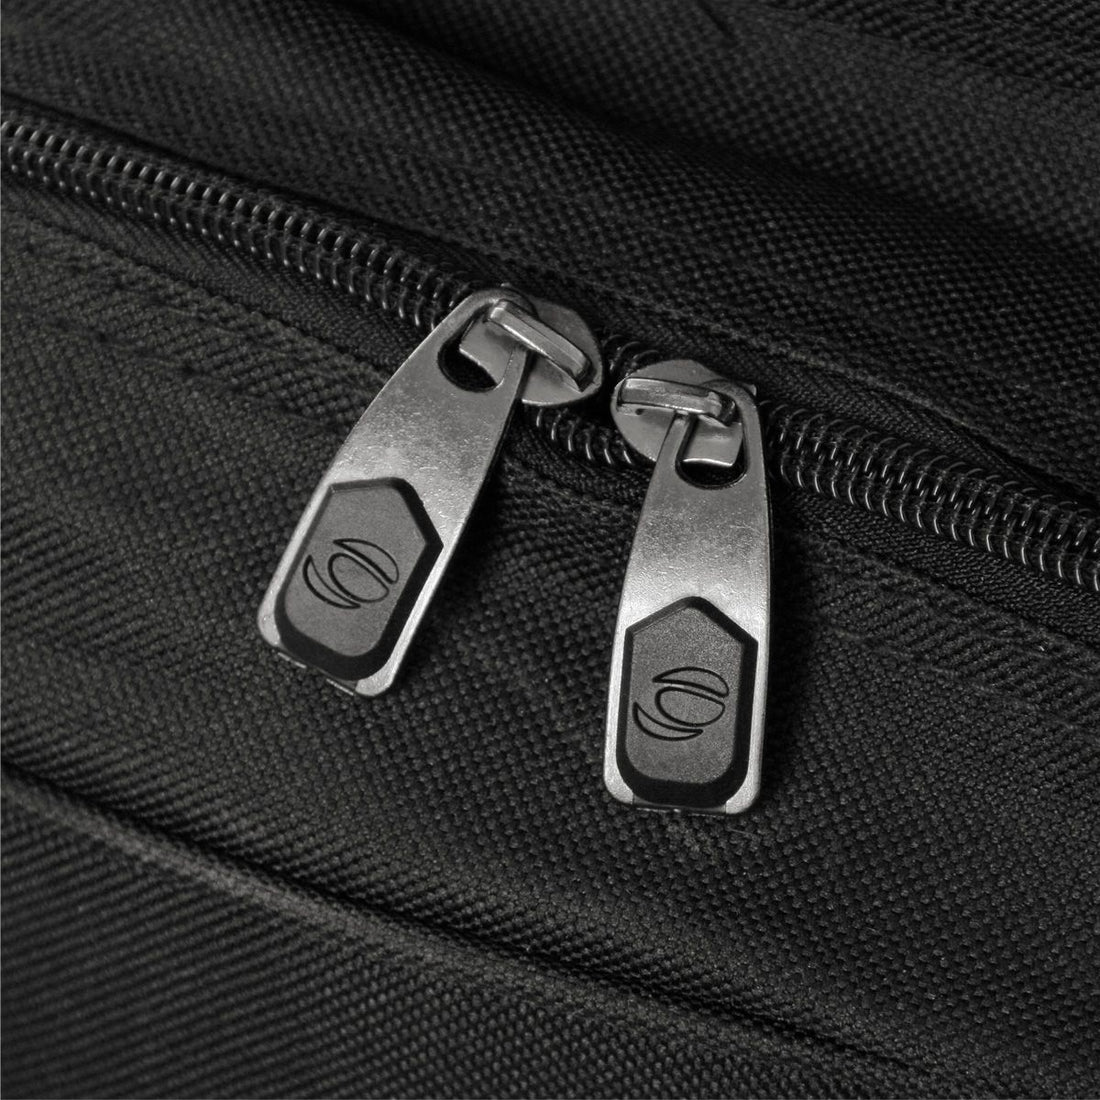 Orlimar logos on the heavy duty zippers of an Orlimar 6.0 Deluxe Wheeled Golf Travel Cover